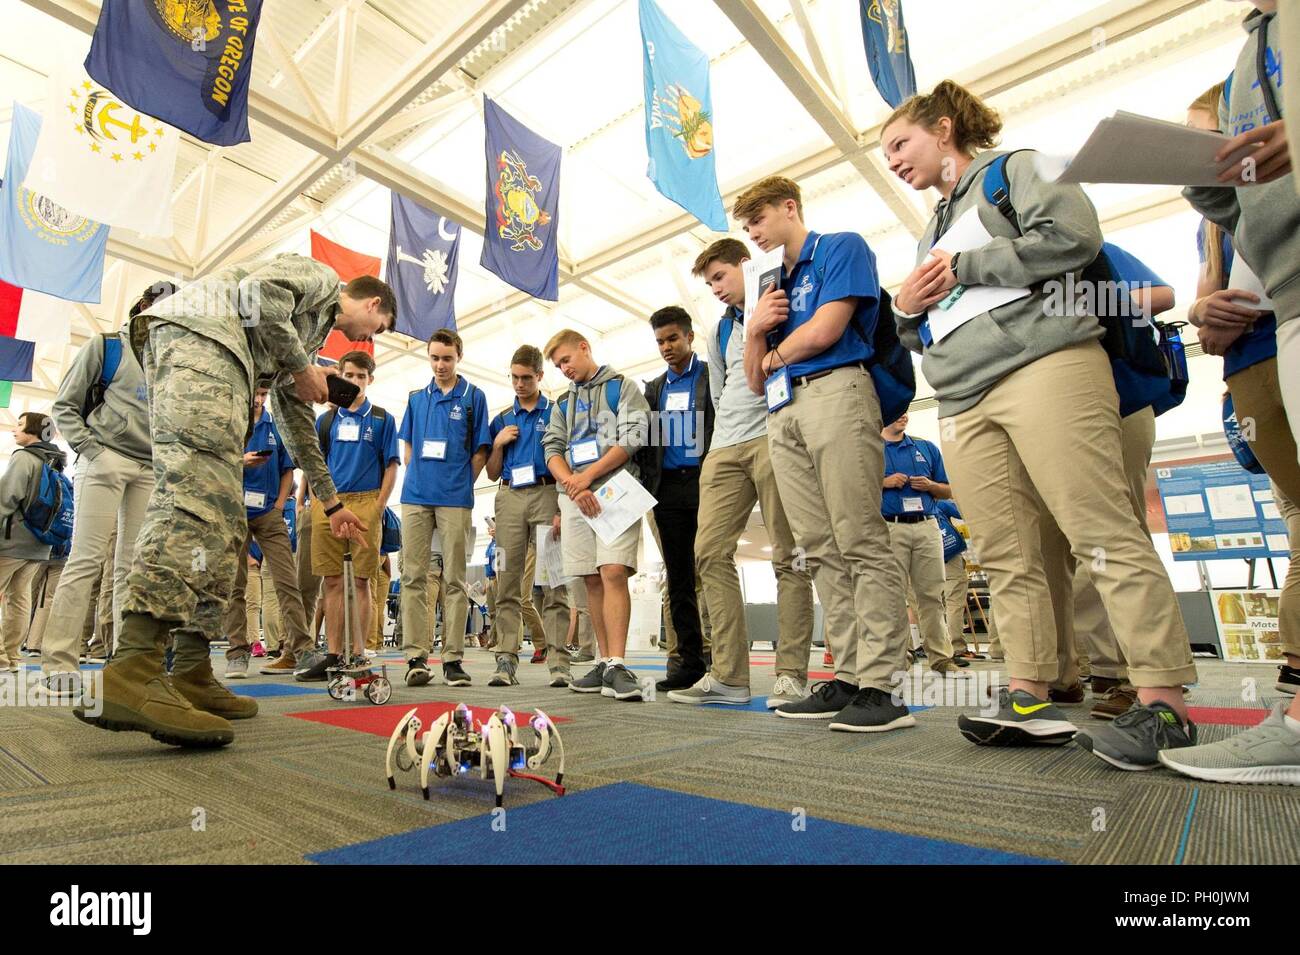 U.S. Air Force Academy – High school students from across the globe  participate in the summer seminar, designed to introduce them to cadet life  and various educational opportunities Jun.14, here Stock Photo -